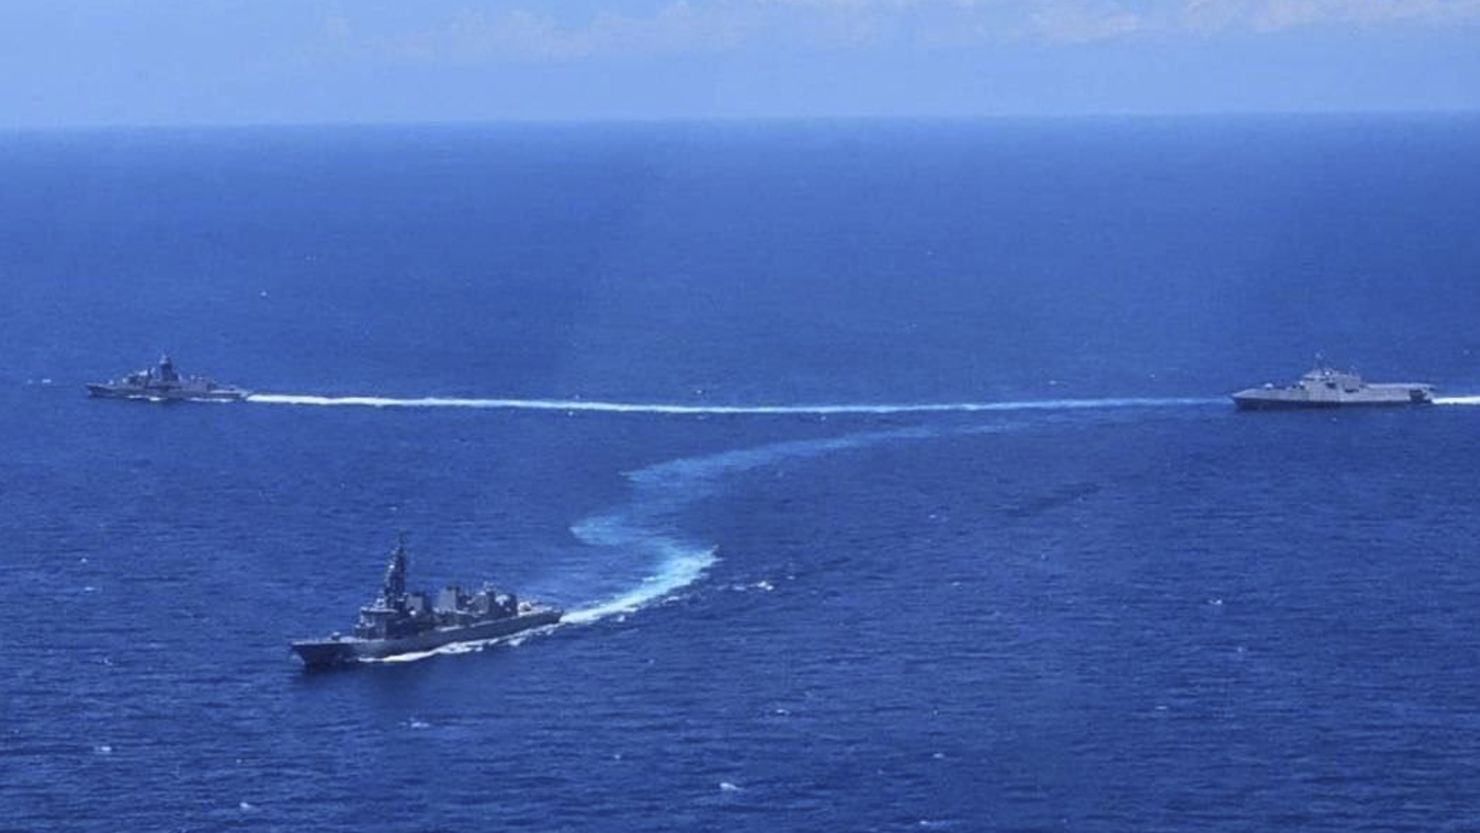 The US, Japan, Australia and the Philippines held their first joint naval exercises in a show of force Sunday in the South China Sea, where Beijing's territorial claims have caused alarm.